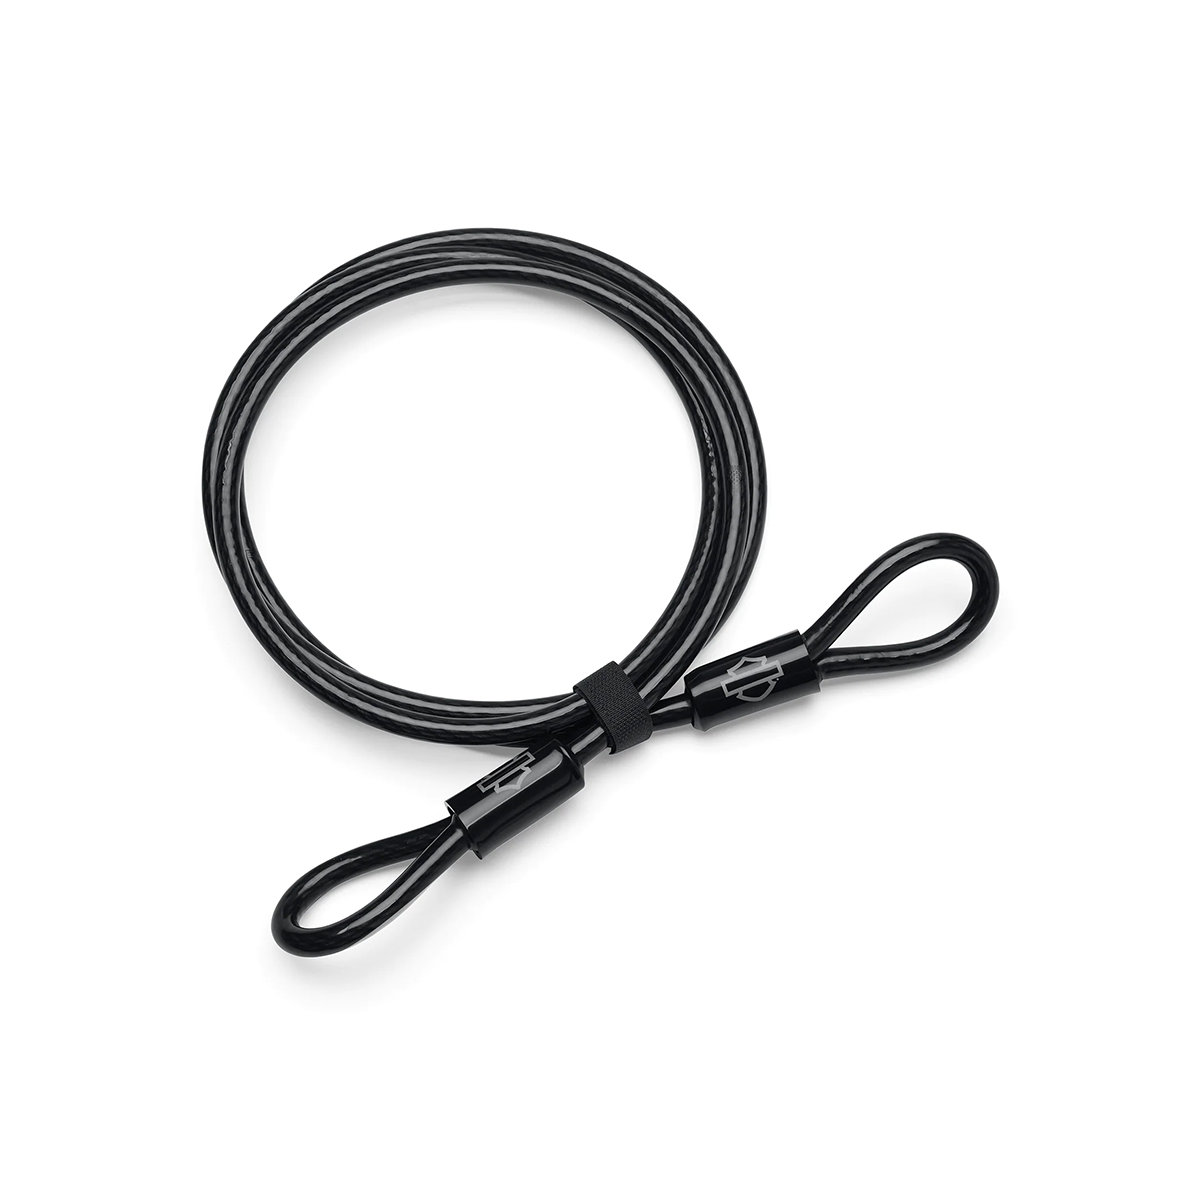 Harley-Davidson Double Looped Security Cable